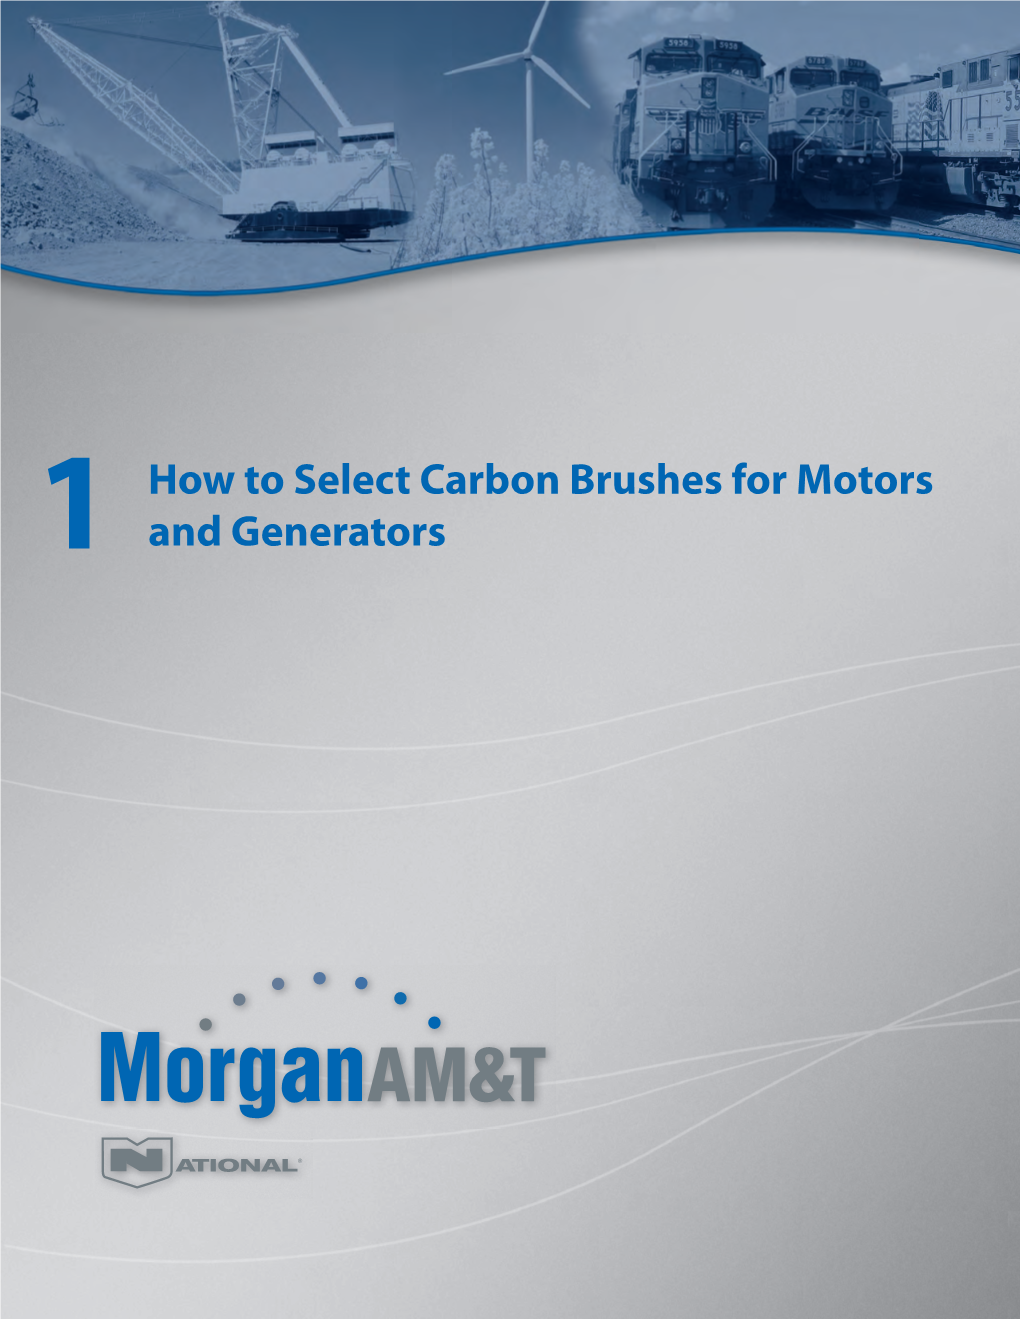 How to Select Carbon Brushes for Motors and Generators